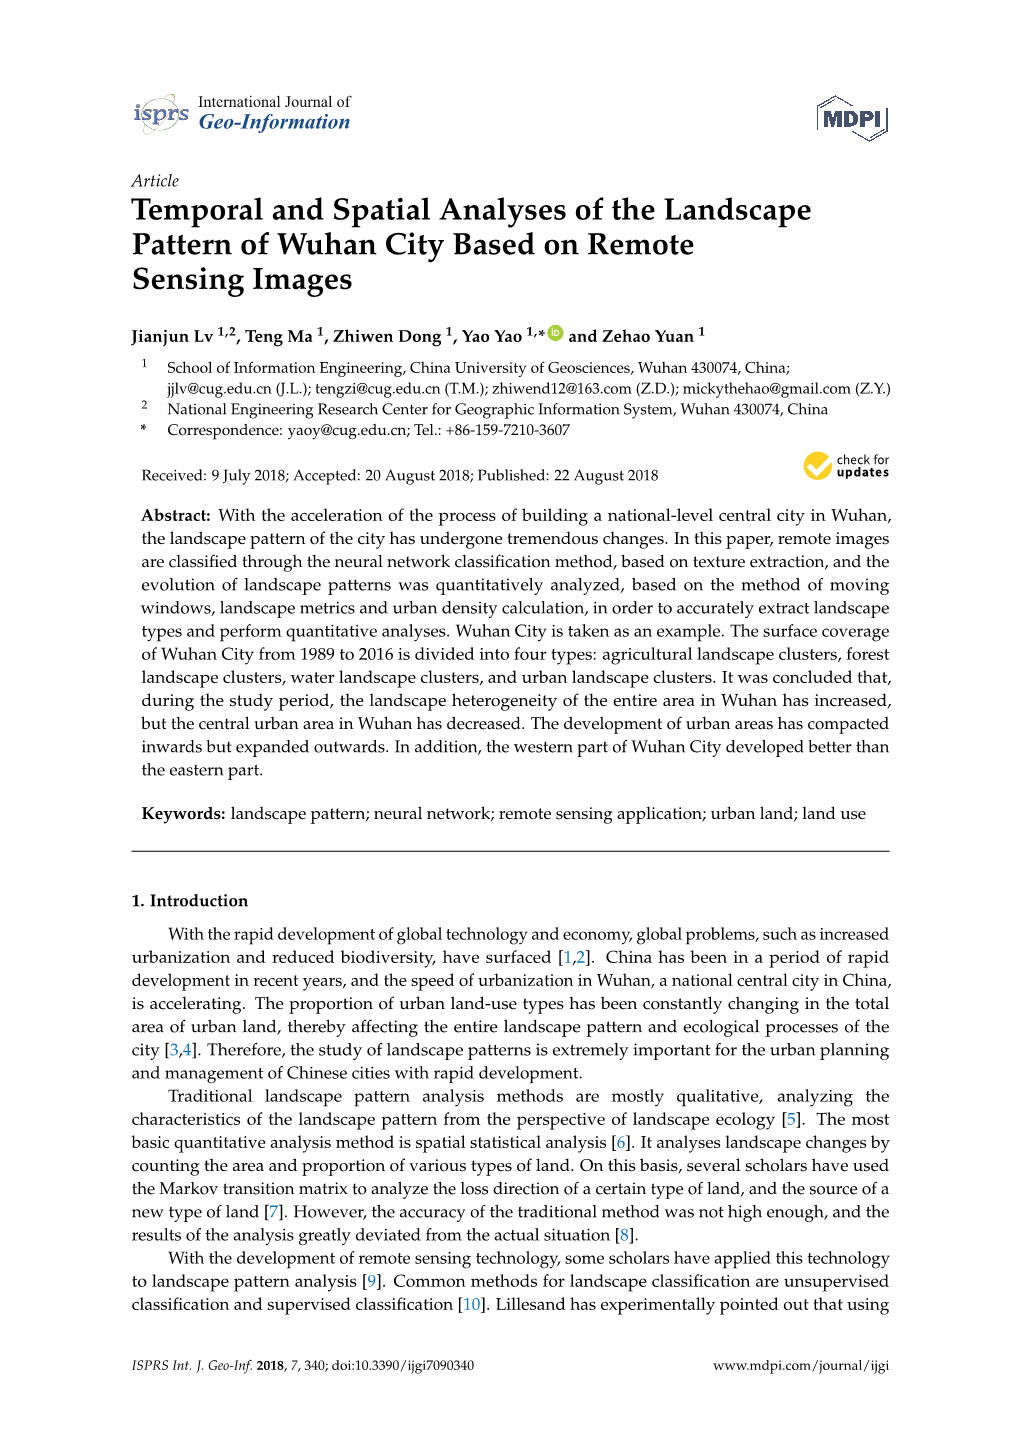 Temporal and Spatial Analyses of the Landscape Pattern of Wuhan City Based on Remote Sensing Images